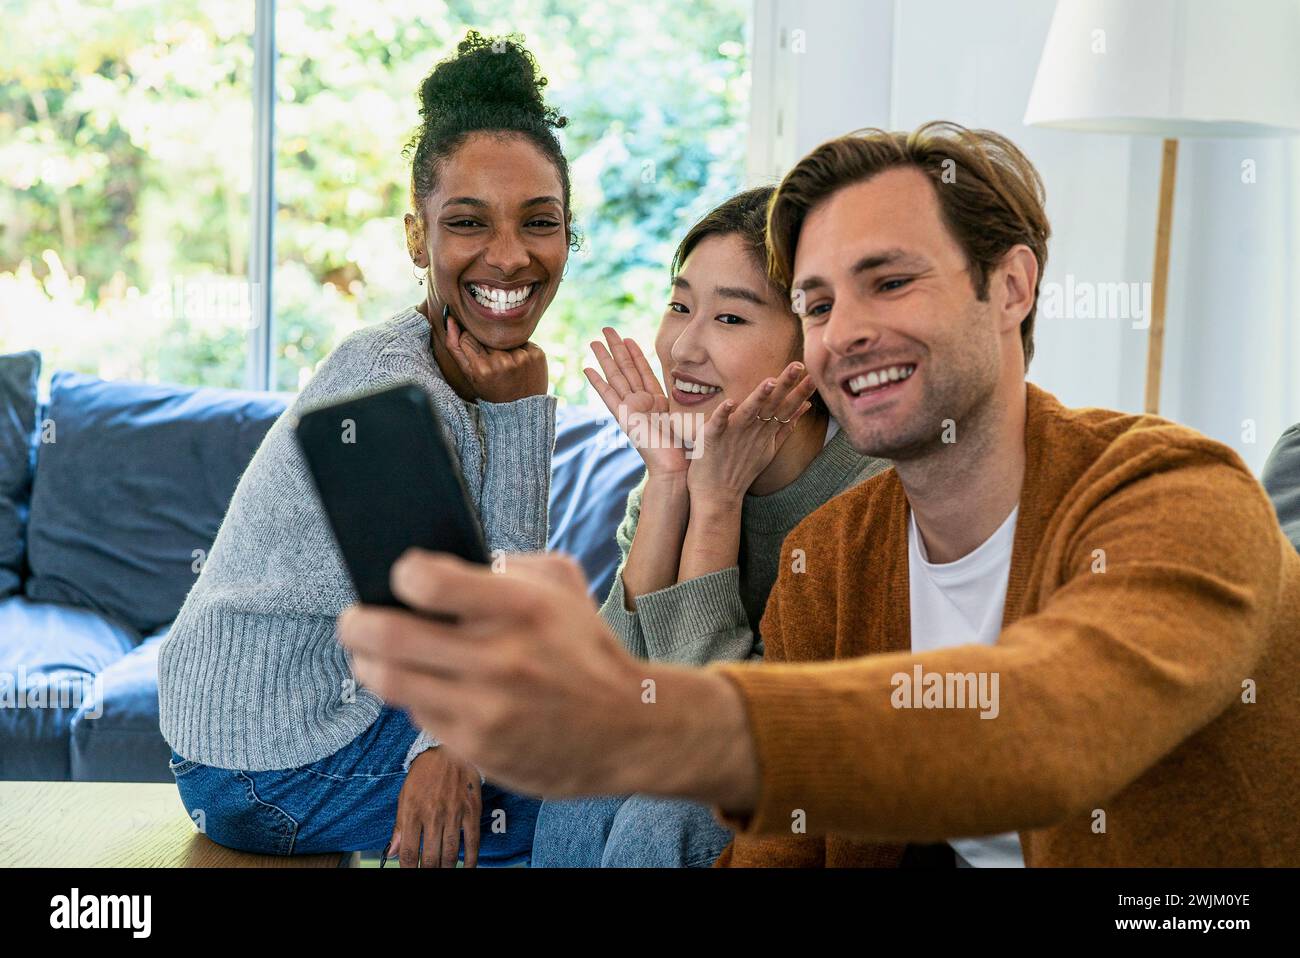 Small group of friends taking a selfie while sitting on sofa Stock Photo